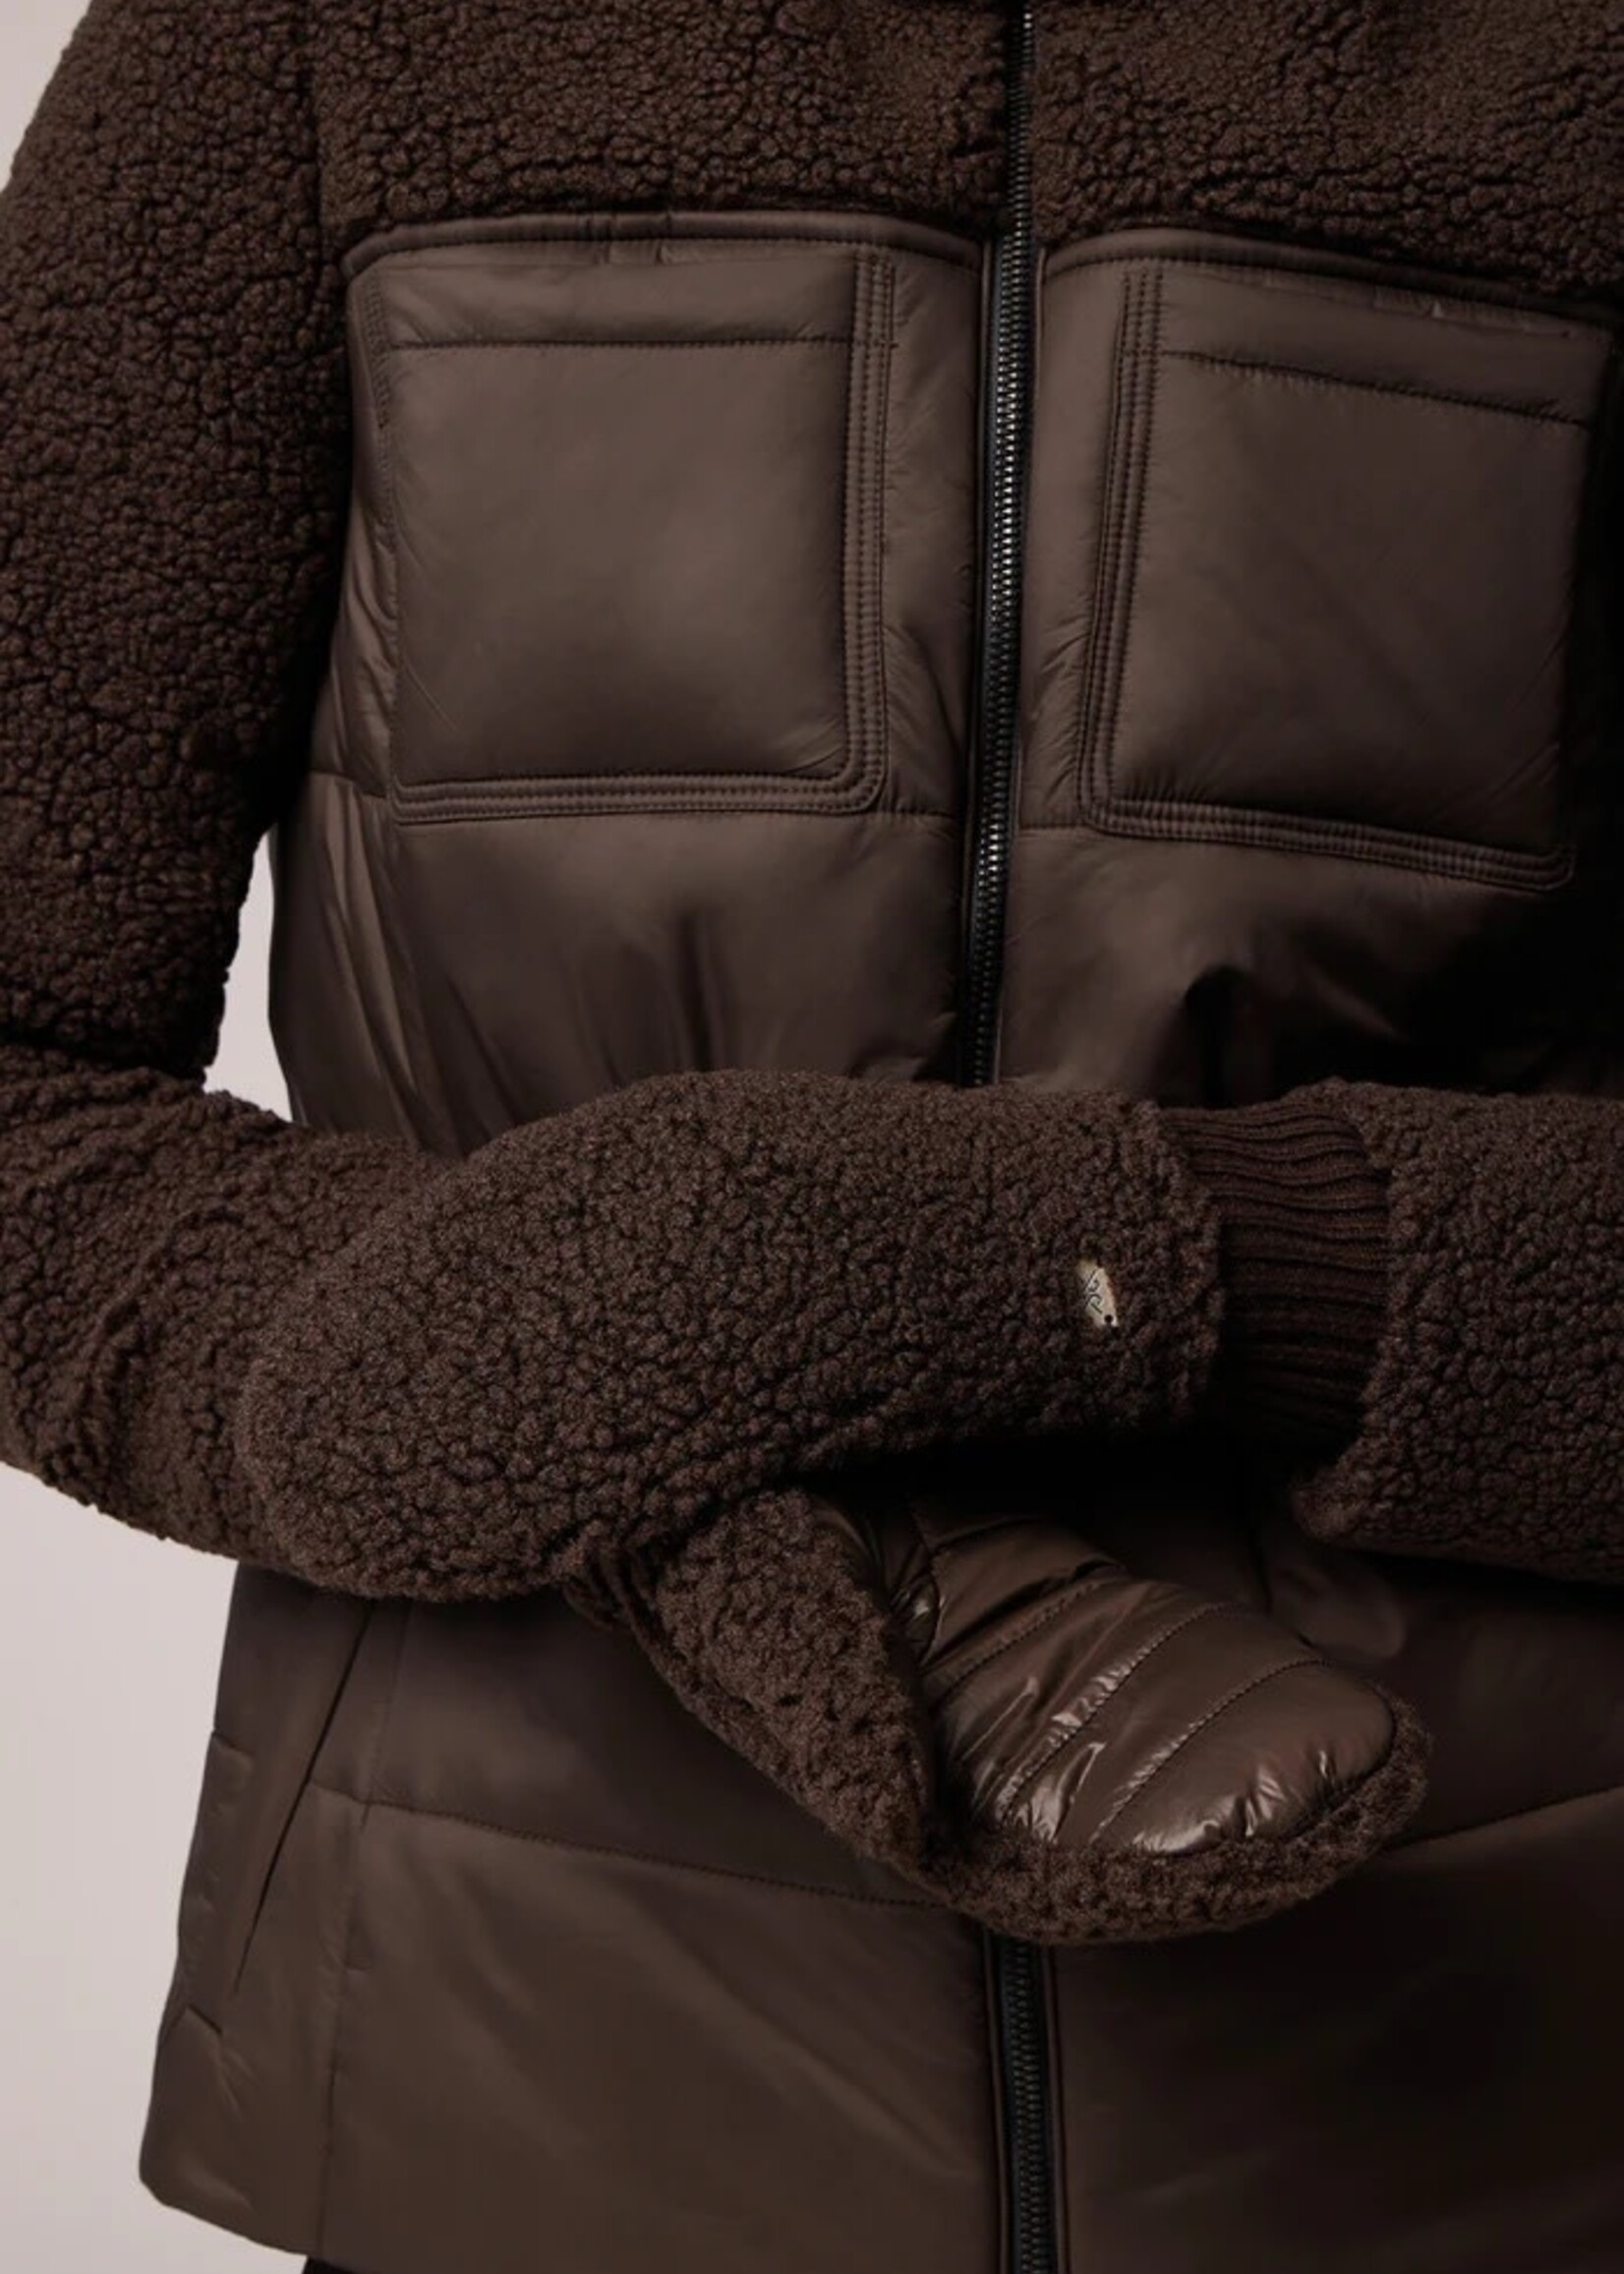 ALINA Sustainable Faux Sherpa Puffer Mittens - Evelyn Lane Clothing Co.